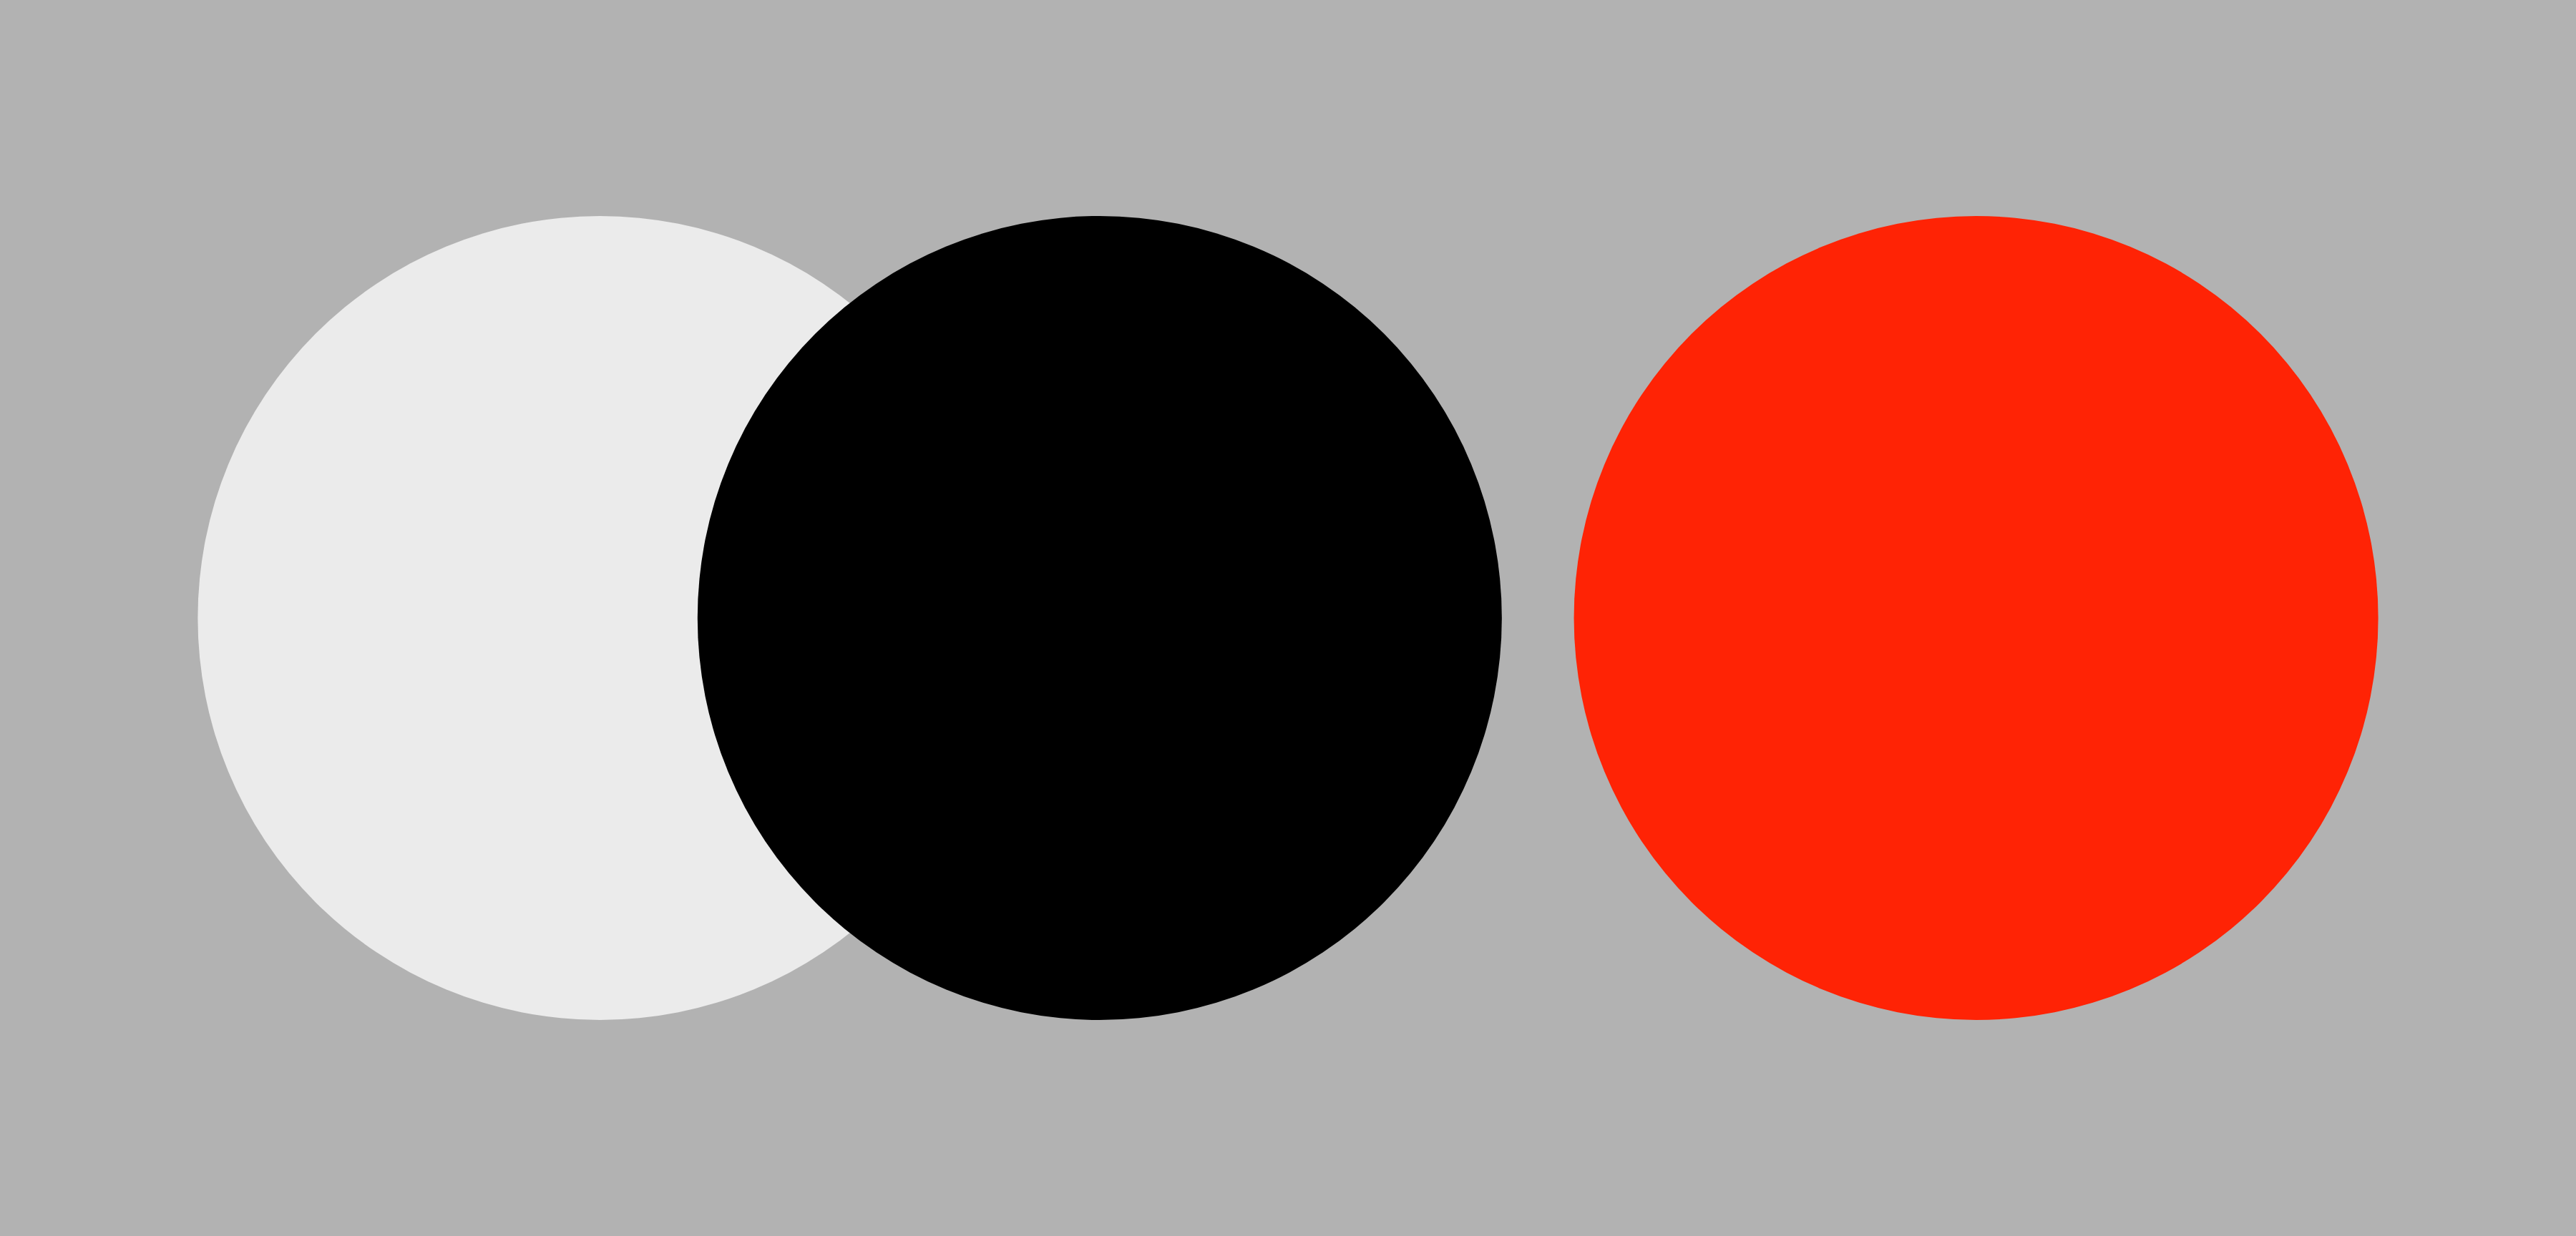 Grey background with white, black and red circles.